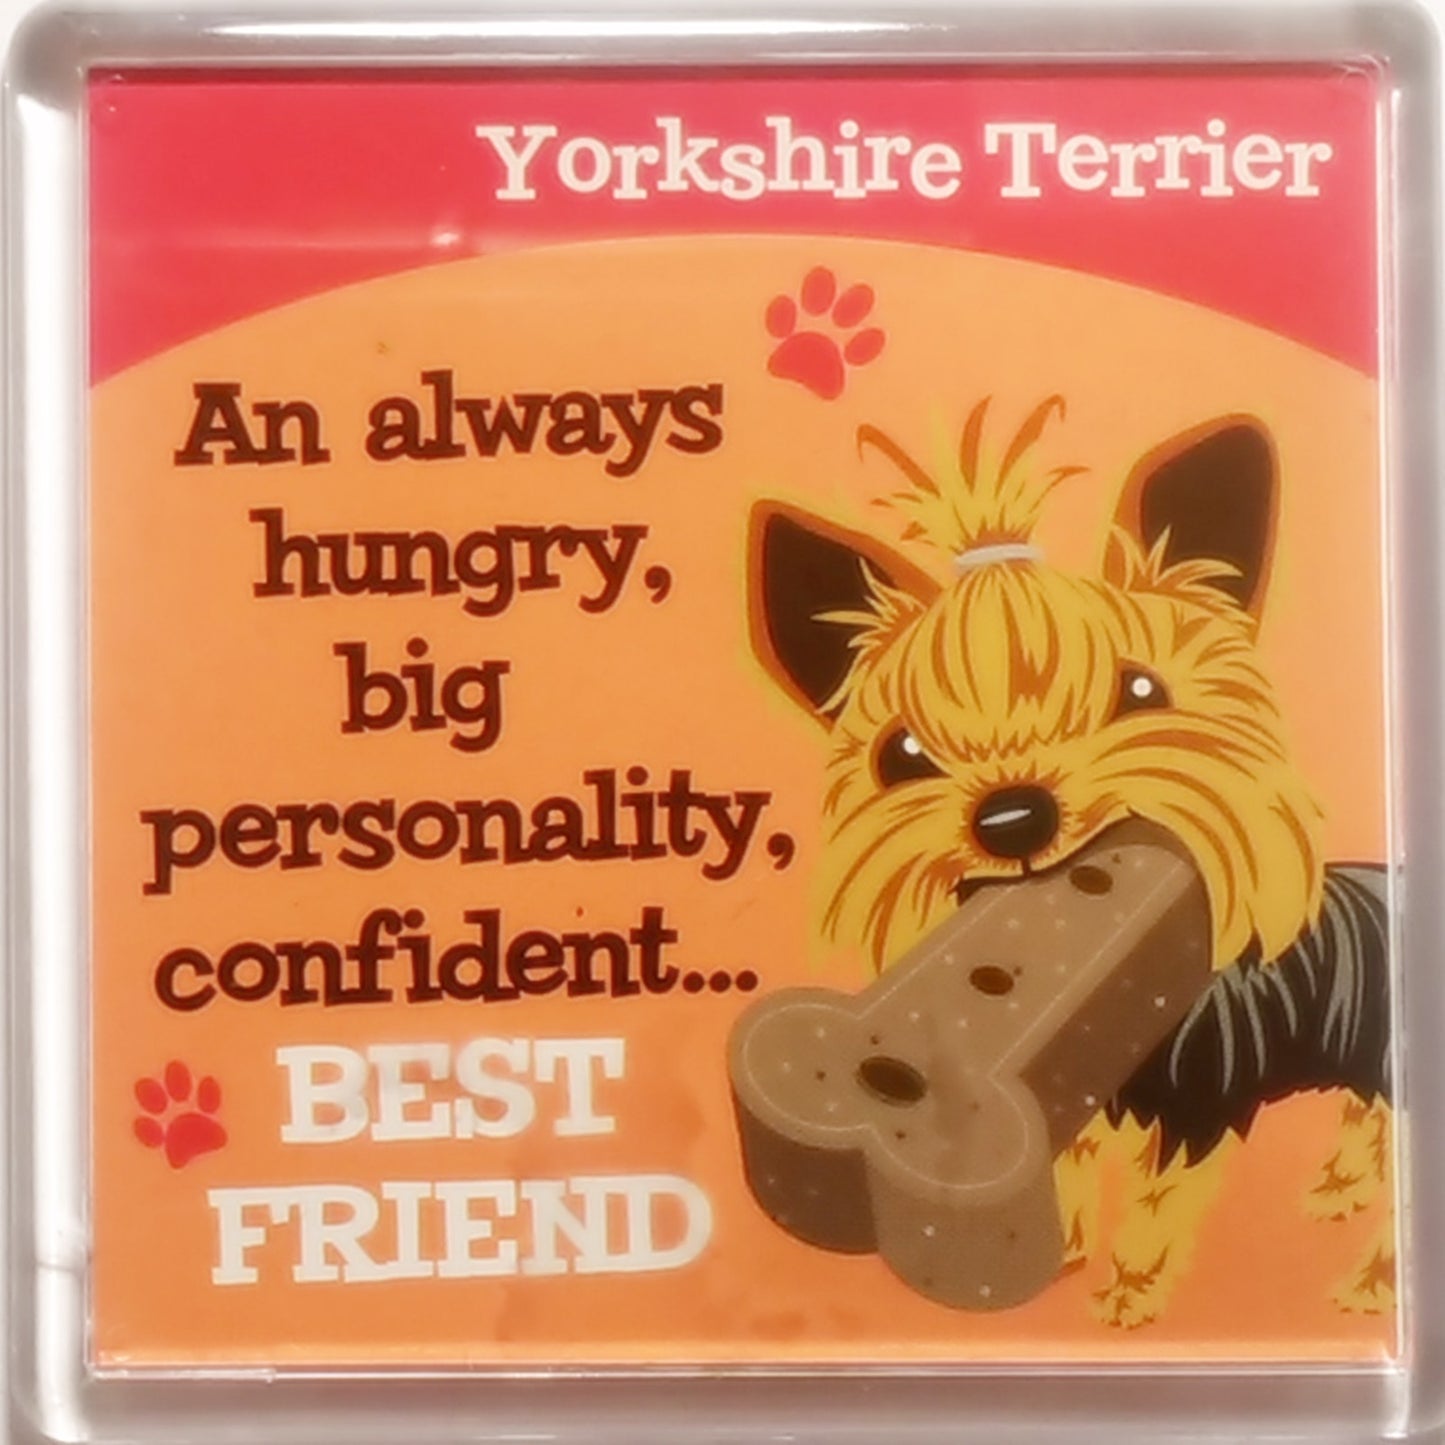 Wags & Whiskers Dog Magnet "Yorkshire Terrier" by Paper Island